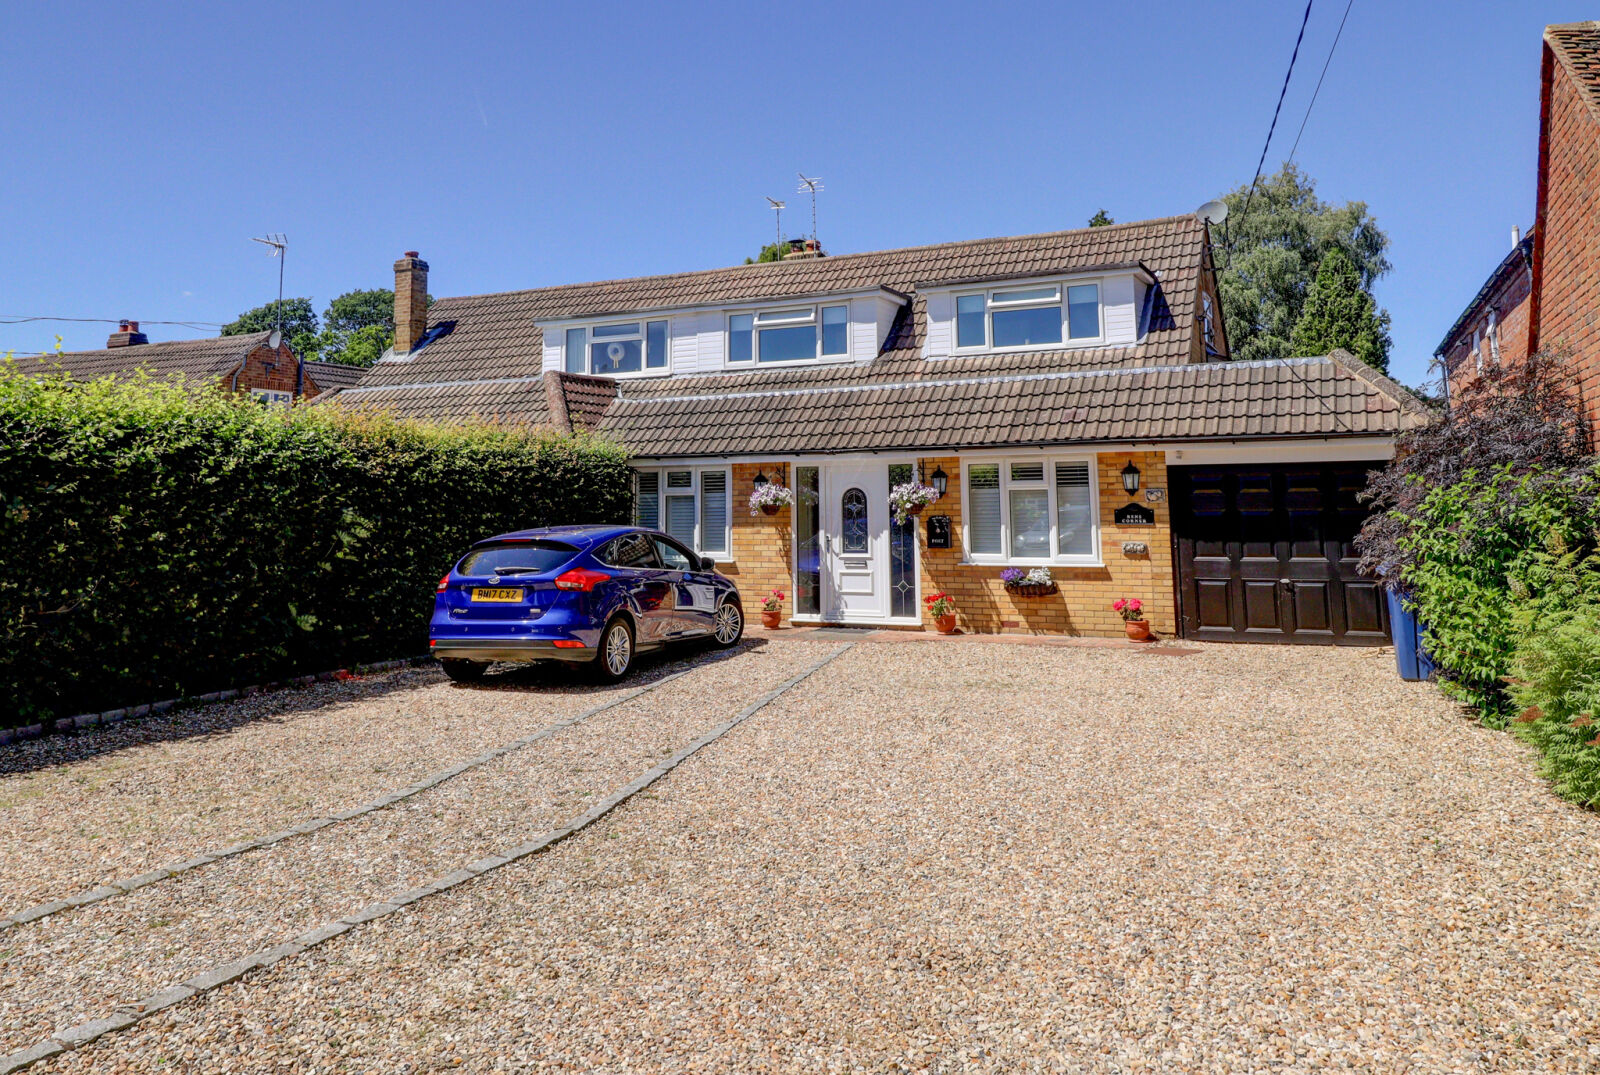 4 bedroom semi detached house for sale Heath End Road, Great Kingshill, HP15, main image